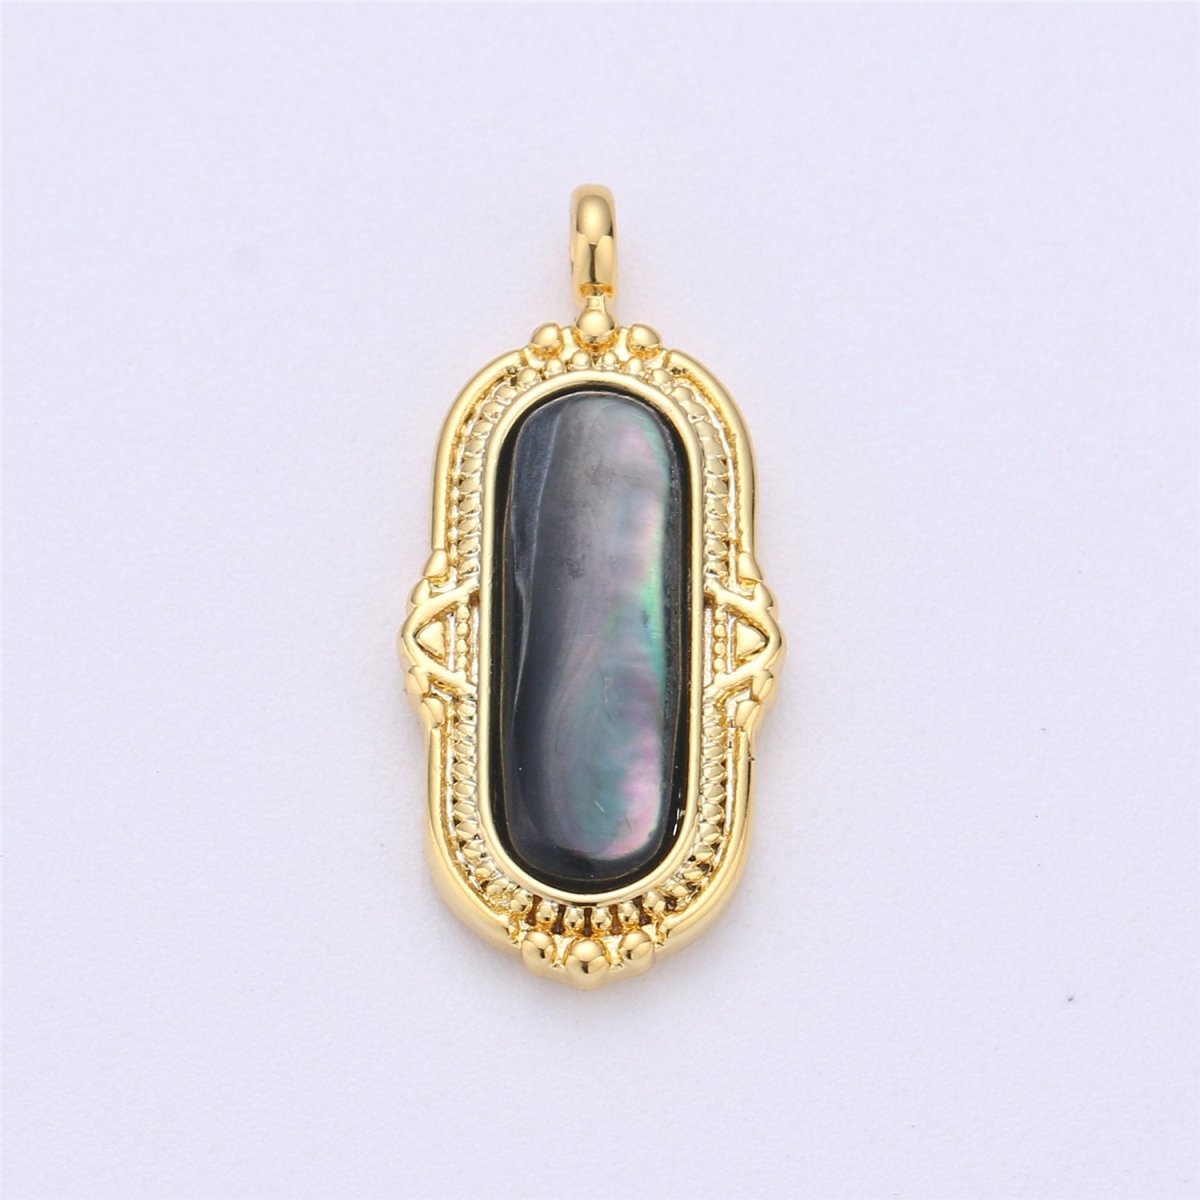 25x12mm Oval Charm, mother of pearl in 24k Gold Filled for Necklace Earring Component Pink White Black Pearl Charm, D-805, D-806 - DLUXCA